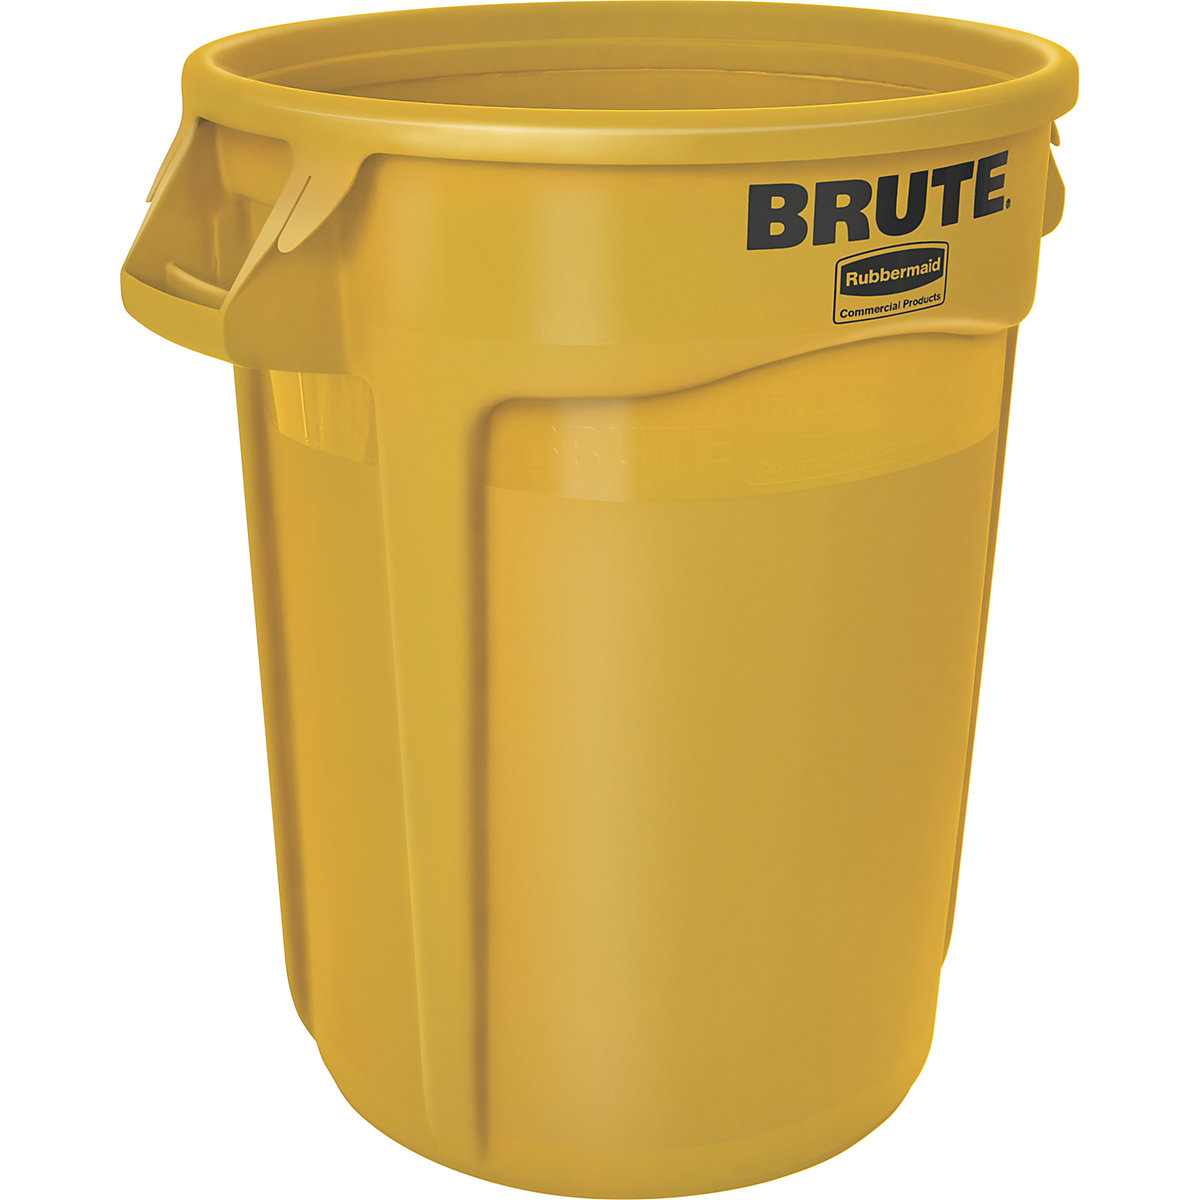 BRUTE® universal container, round – Rubbermaid, capacity 121 l, yellow-12